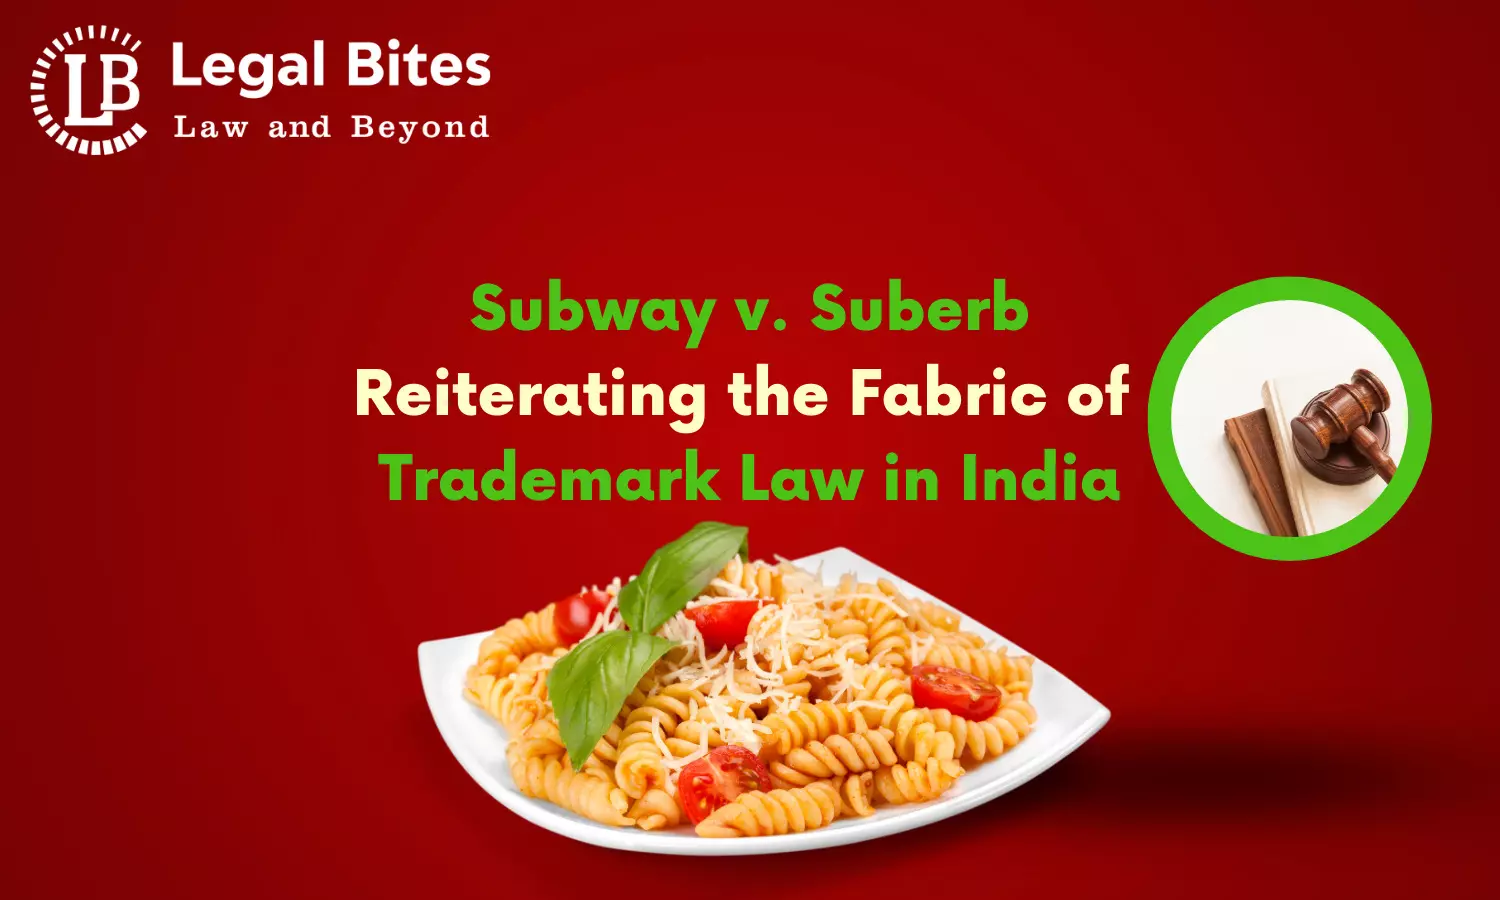 Subway v. Suberb: Reiterating the Fabric of Trademark Law in India